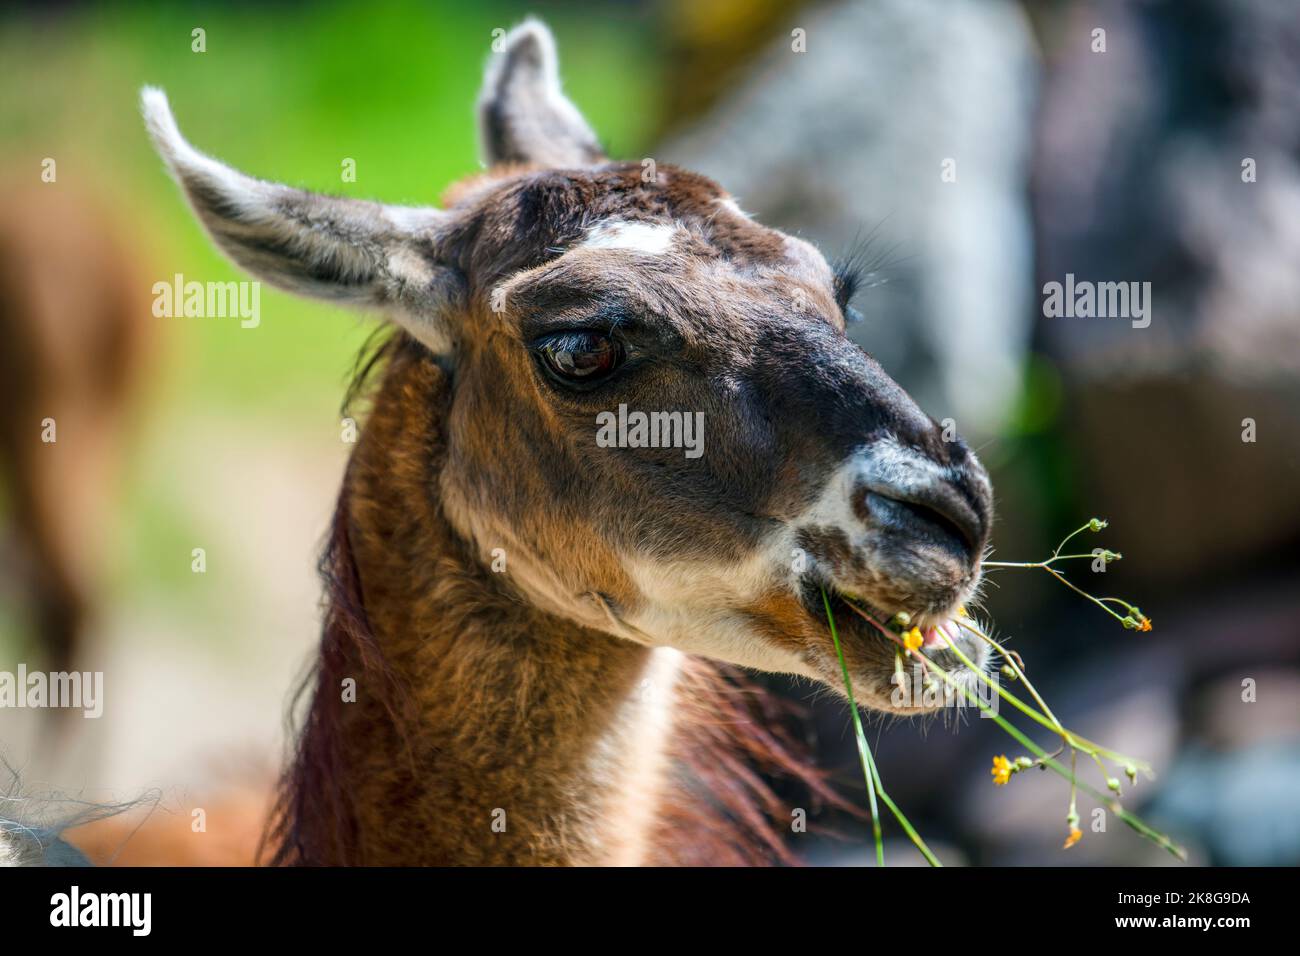 Lama looks into the camera and eats grass. Close-up portrait of a llama chewing grass. Stock Photo